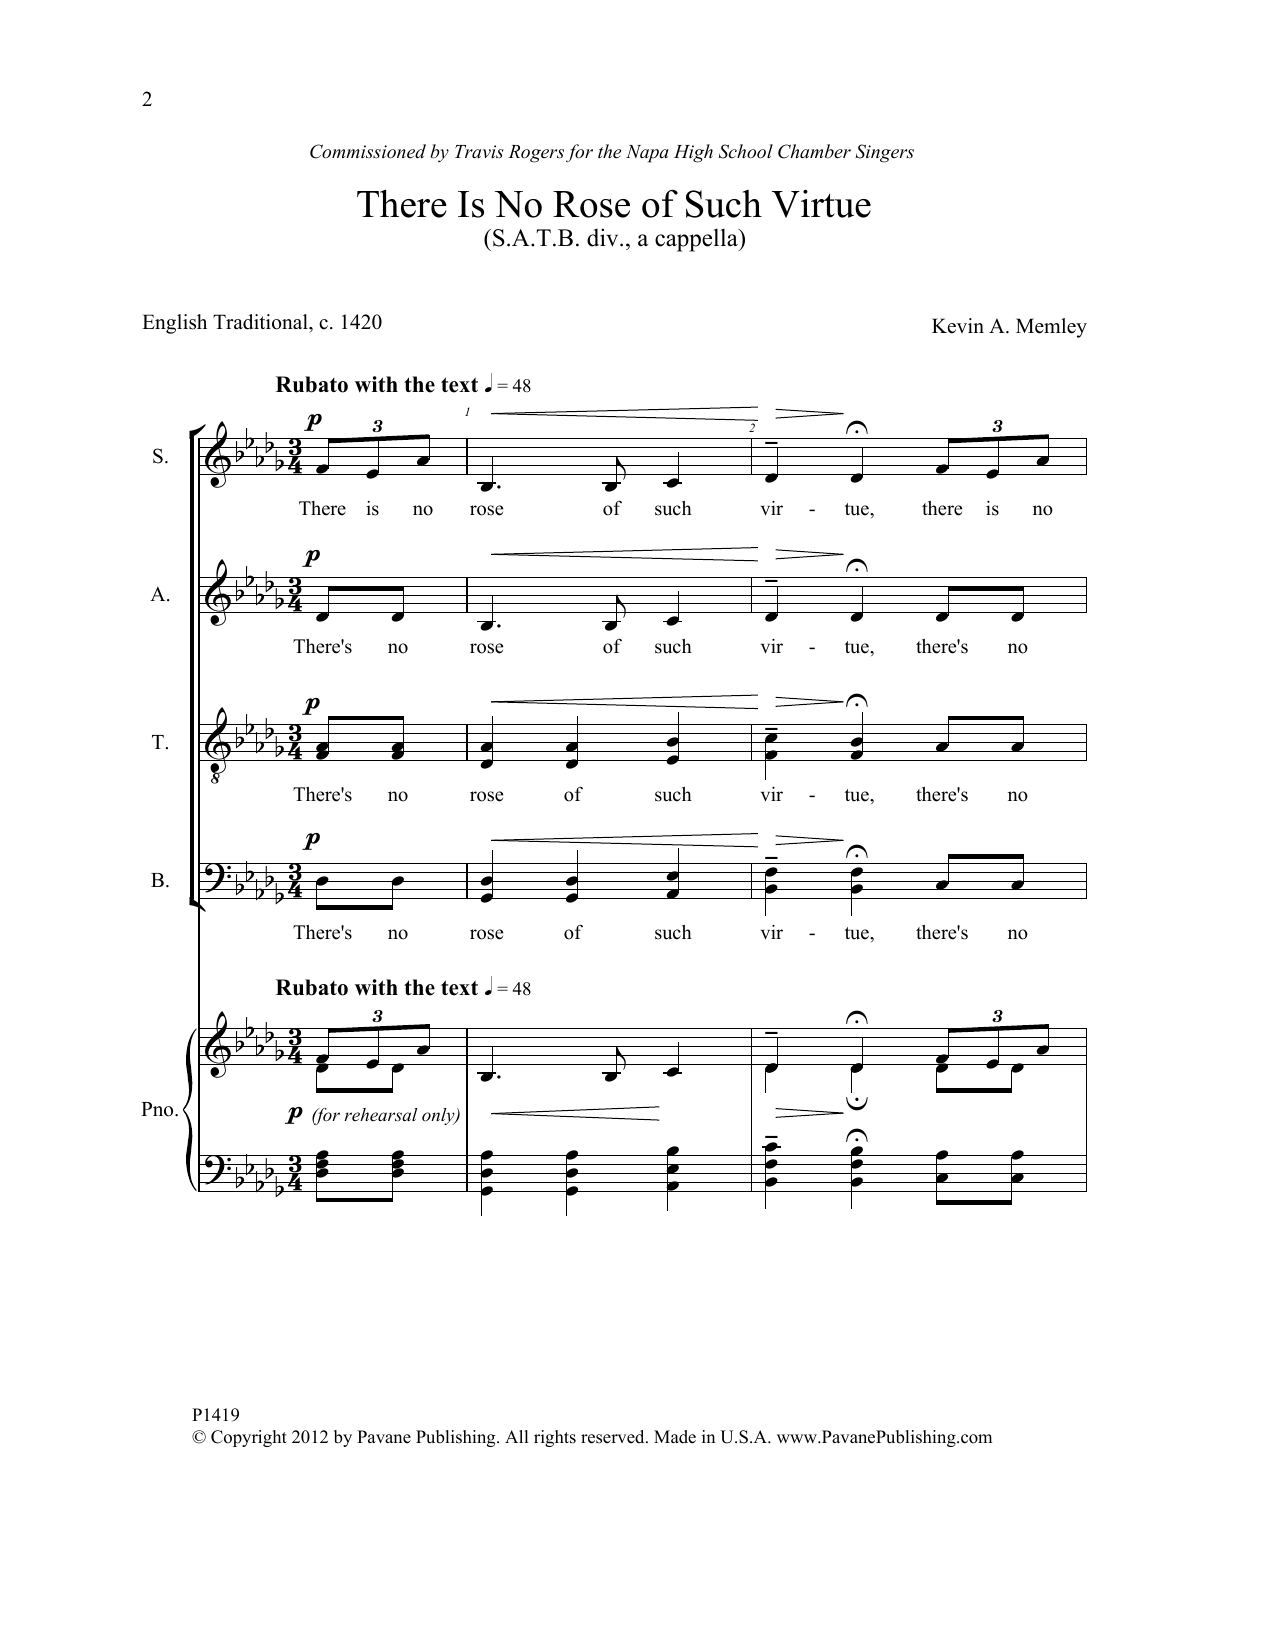 Download Kevin A. Memley There Is No Rose of Such Virtue Sheet Music